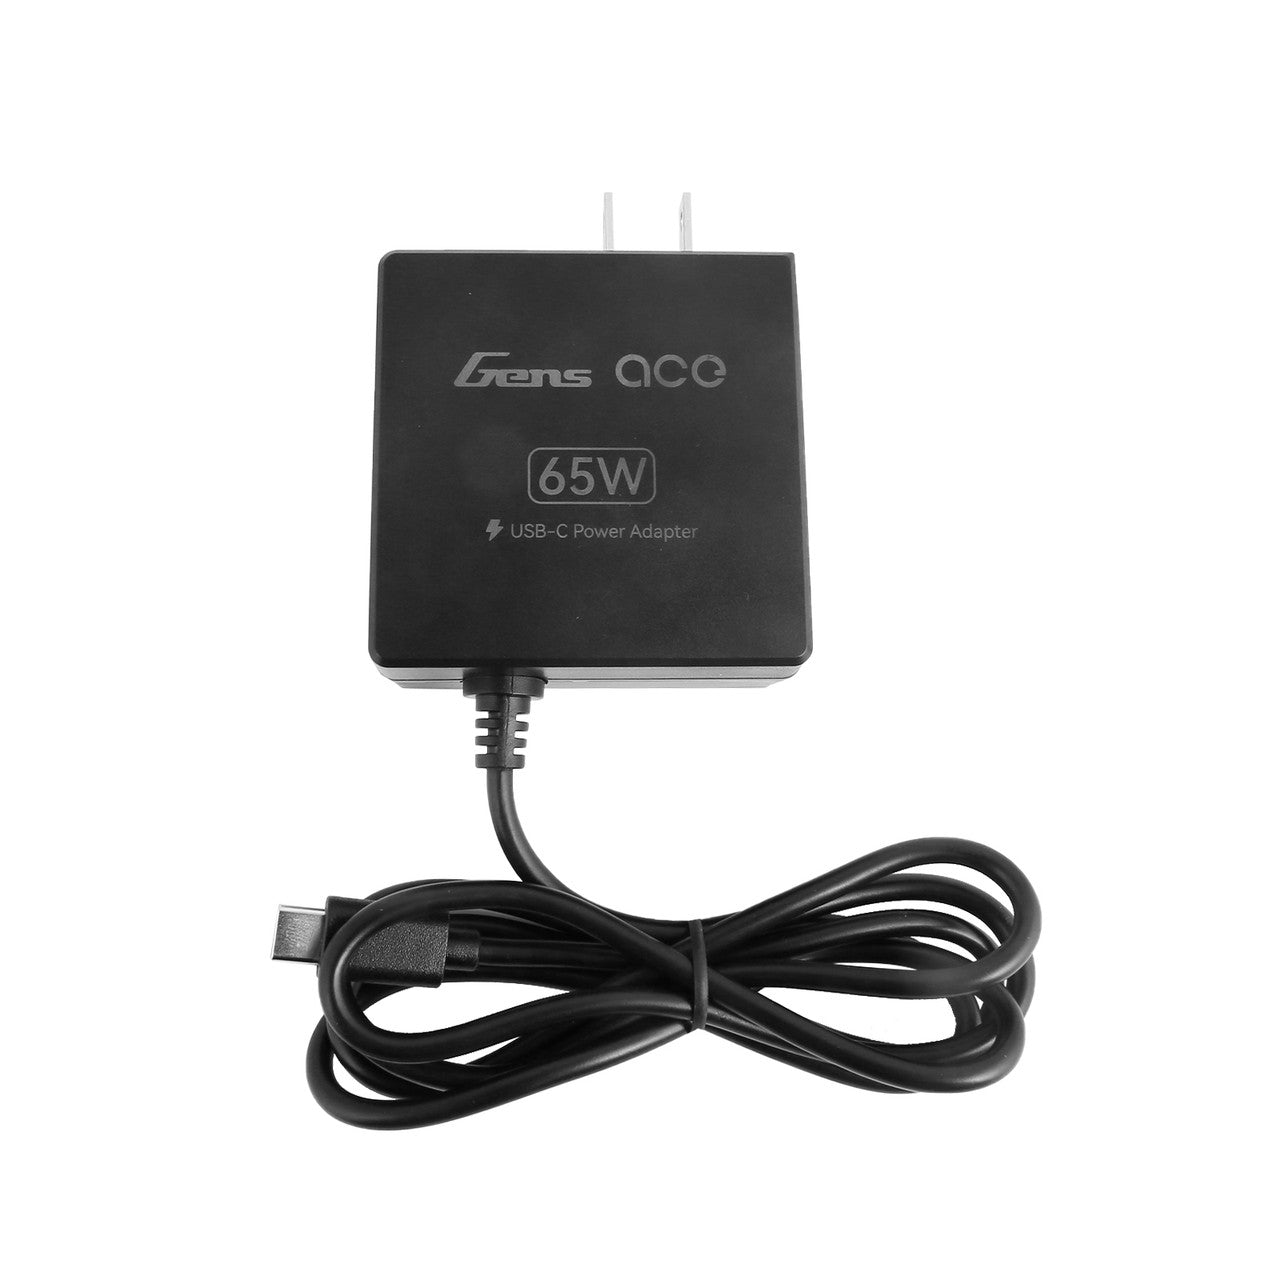 Gens Ace 65W Power Supply Adapter-US